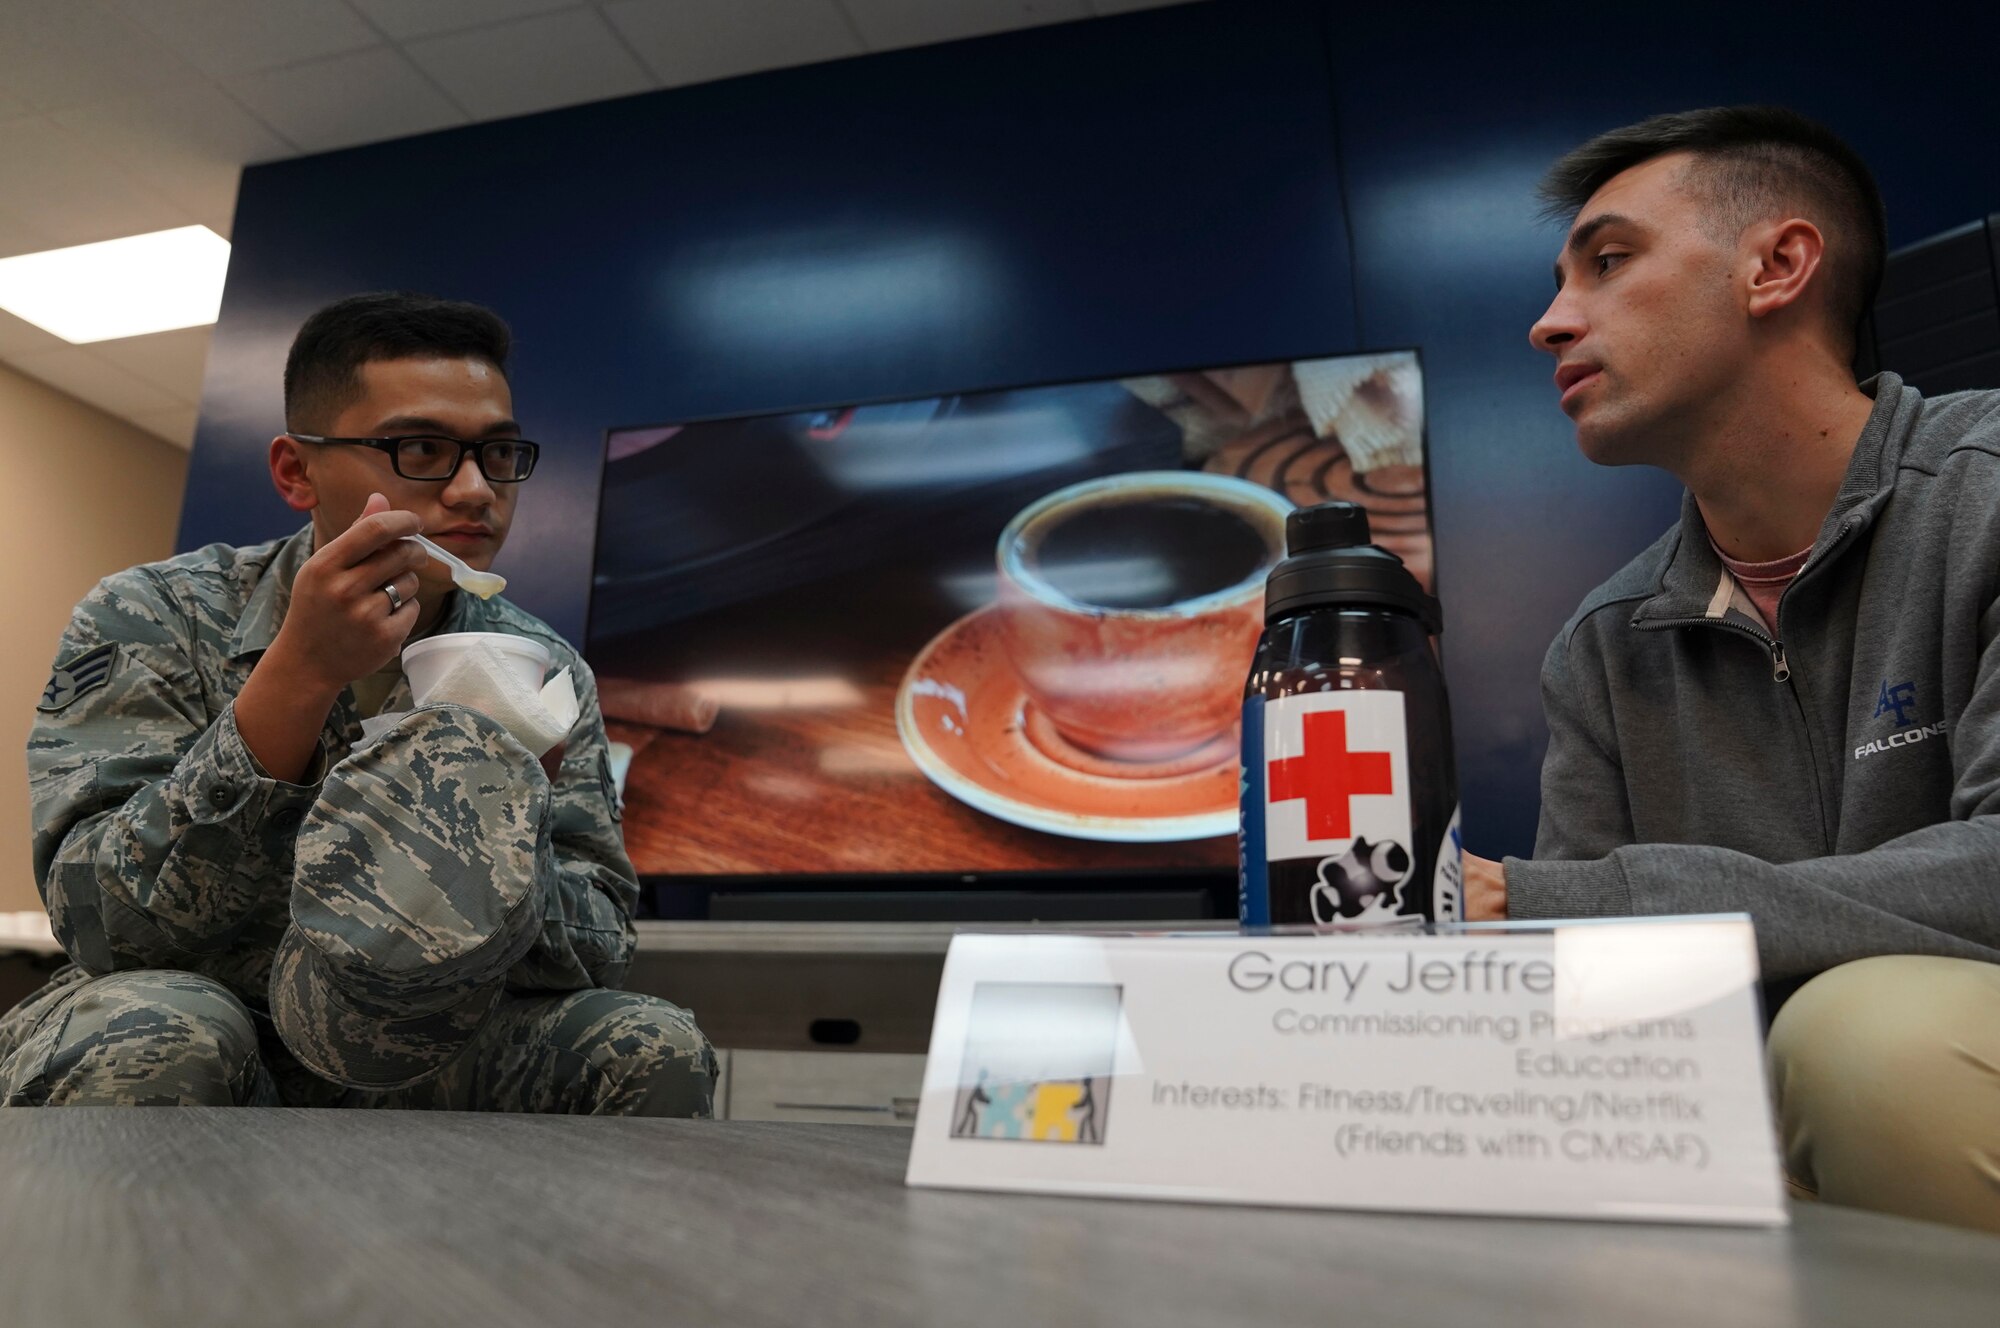 U.S. Air Force Senior Airman John Mabida, 81st Contract Squadron contract specialist, and Staff Sgt. Gary Jeffery, Medical Support Squadron storage and distribution non-commissioned officer in charge, converse during the first Leaders Influencing Together event inside the Larcher Chapel at Keesler Air Force Base, Mississippi, November 8, 2019.  The LIFT program pairs young and experienced Airmen together to build on various skills to improve the quality of their career. (U.S. Air Force photo by Airman 1st Class Spencer Tobler)